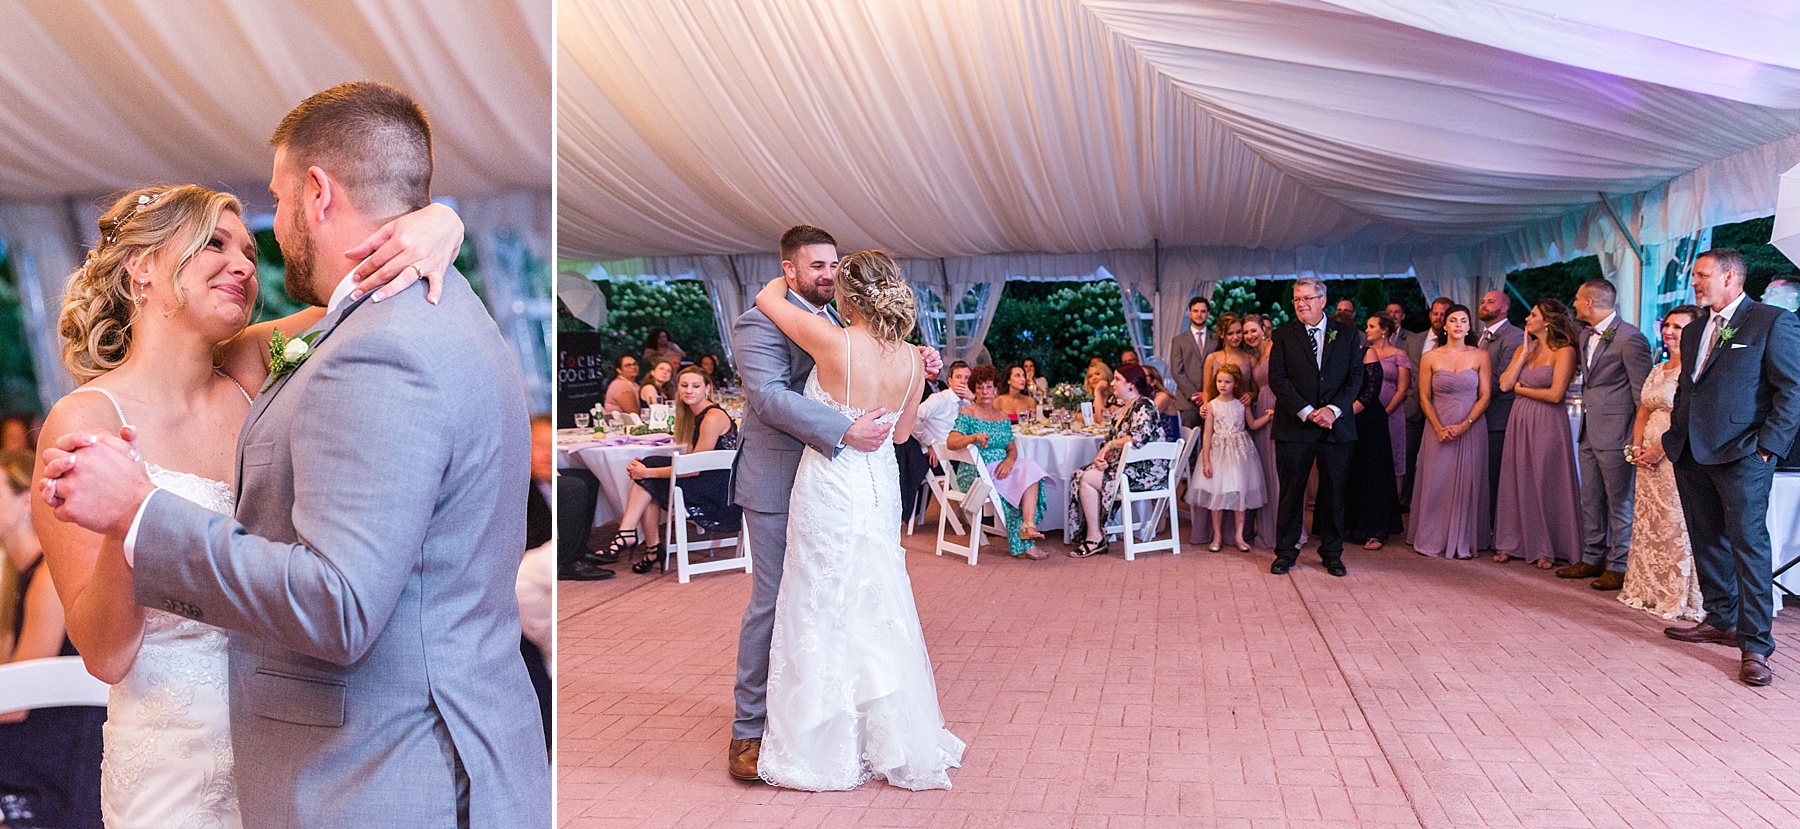 Alexandra Mandato Photography photographs first dance in Maryland